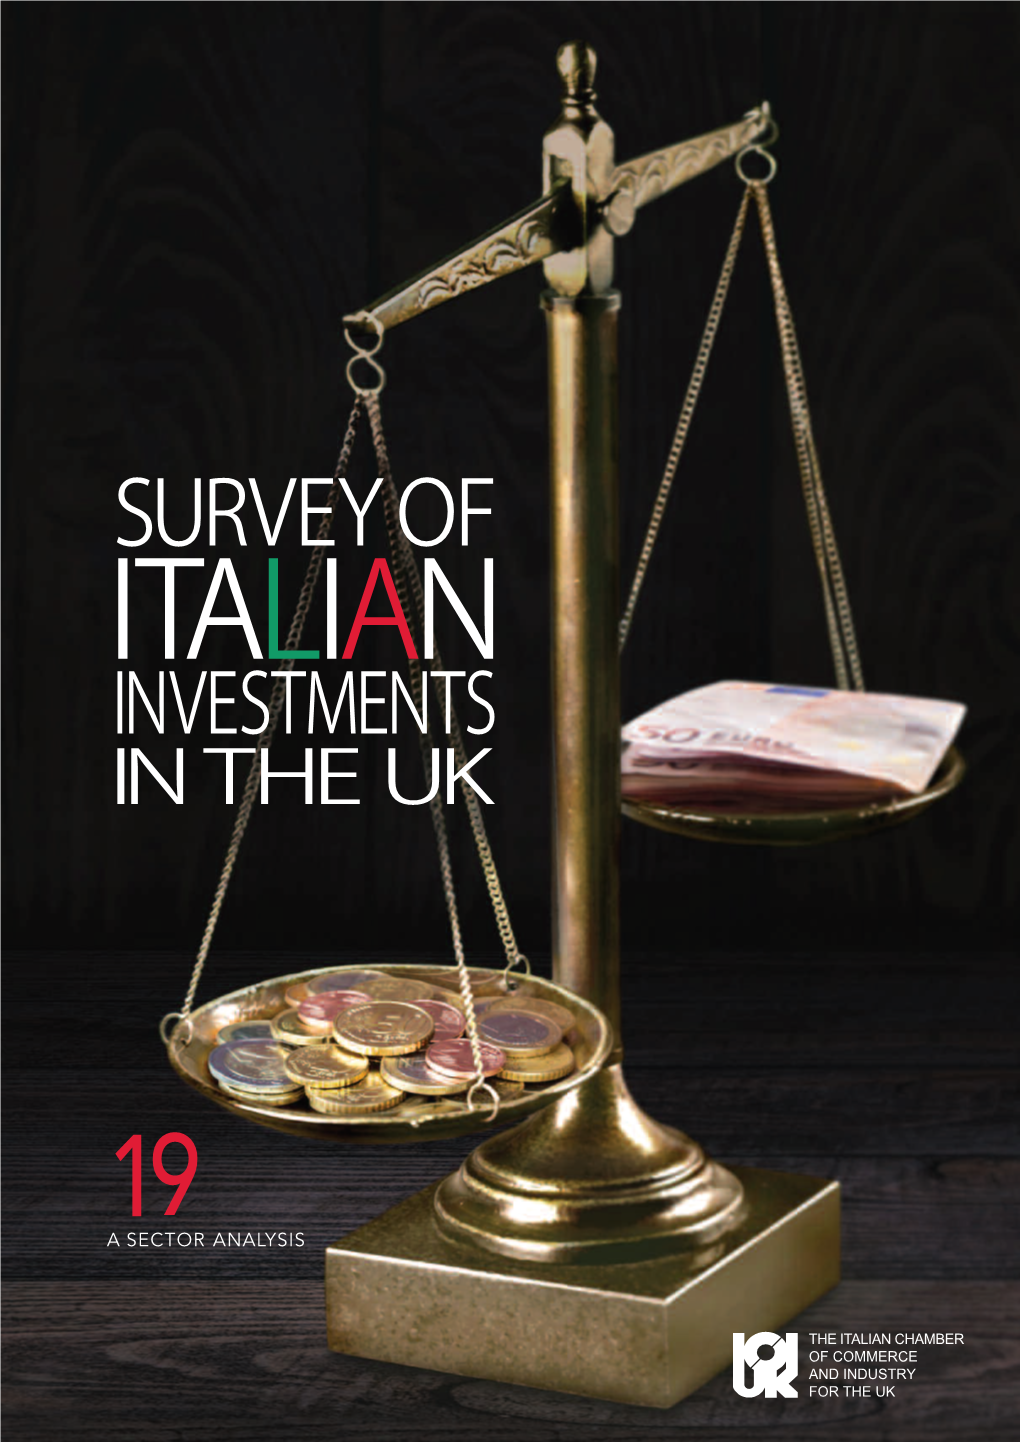 Survey of Italian Investments in the UK, Comes at a Time T of Profound Changes